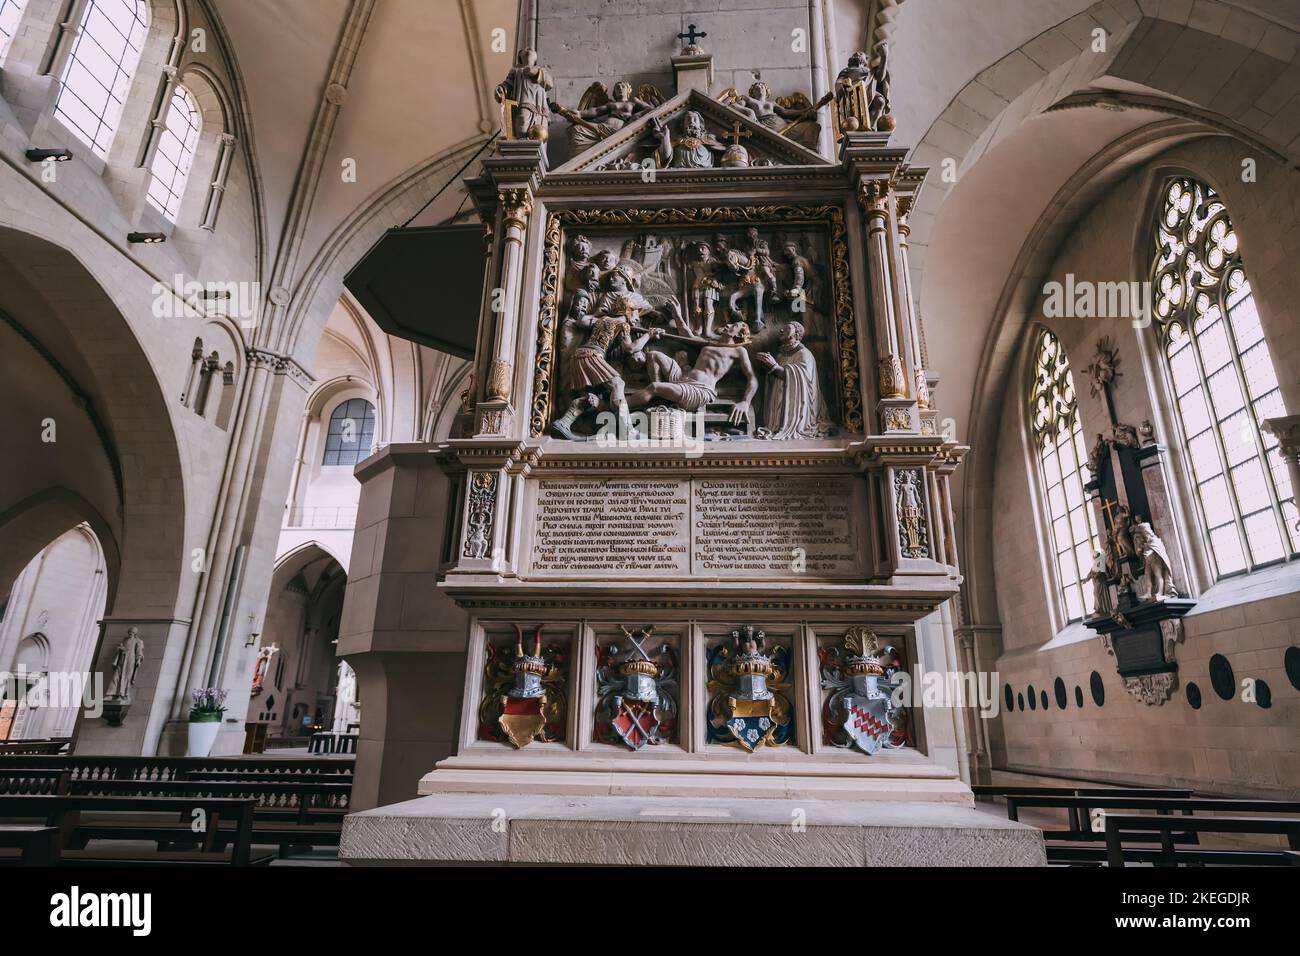 25 July 2022, Munster, Germany: Famous Saint Paulus Dom Cathedral interior view. Sightseeing and tourism in North Rhein Westphalia and Muenster Stock Photo